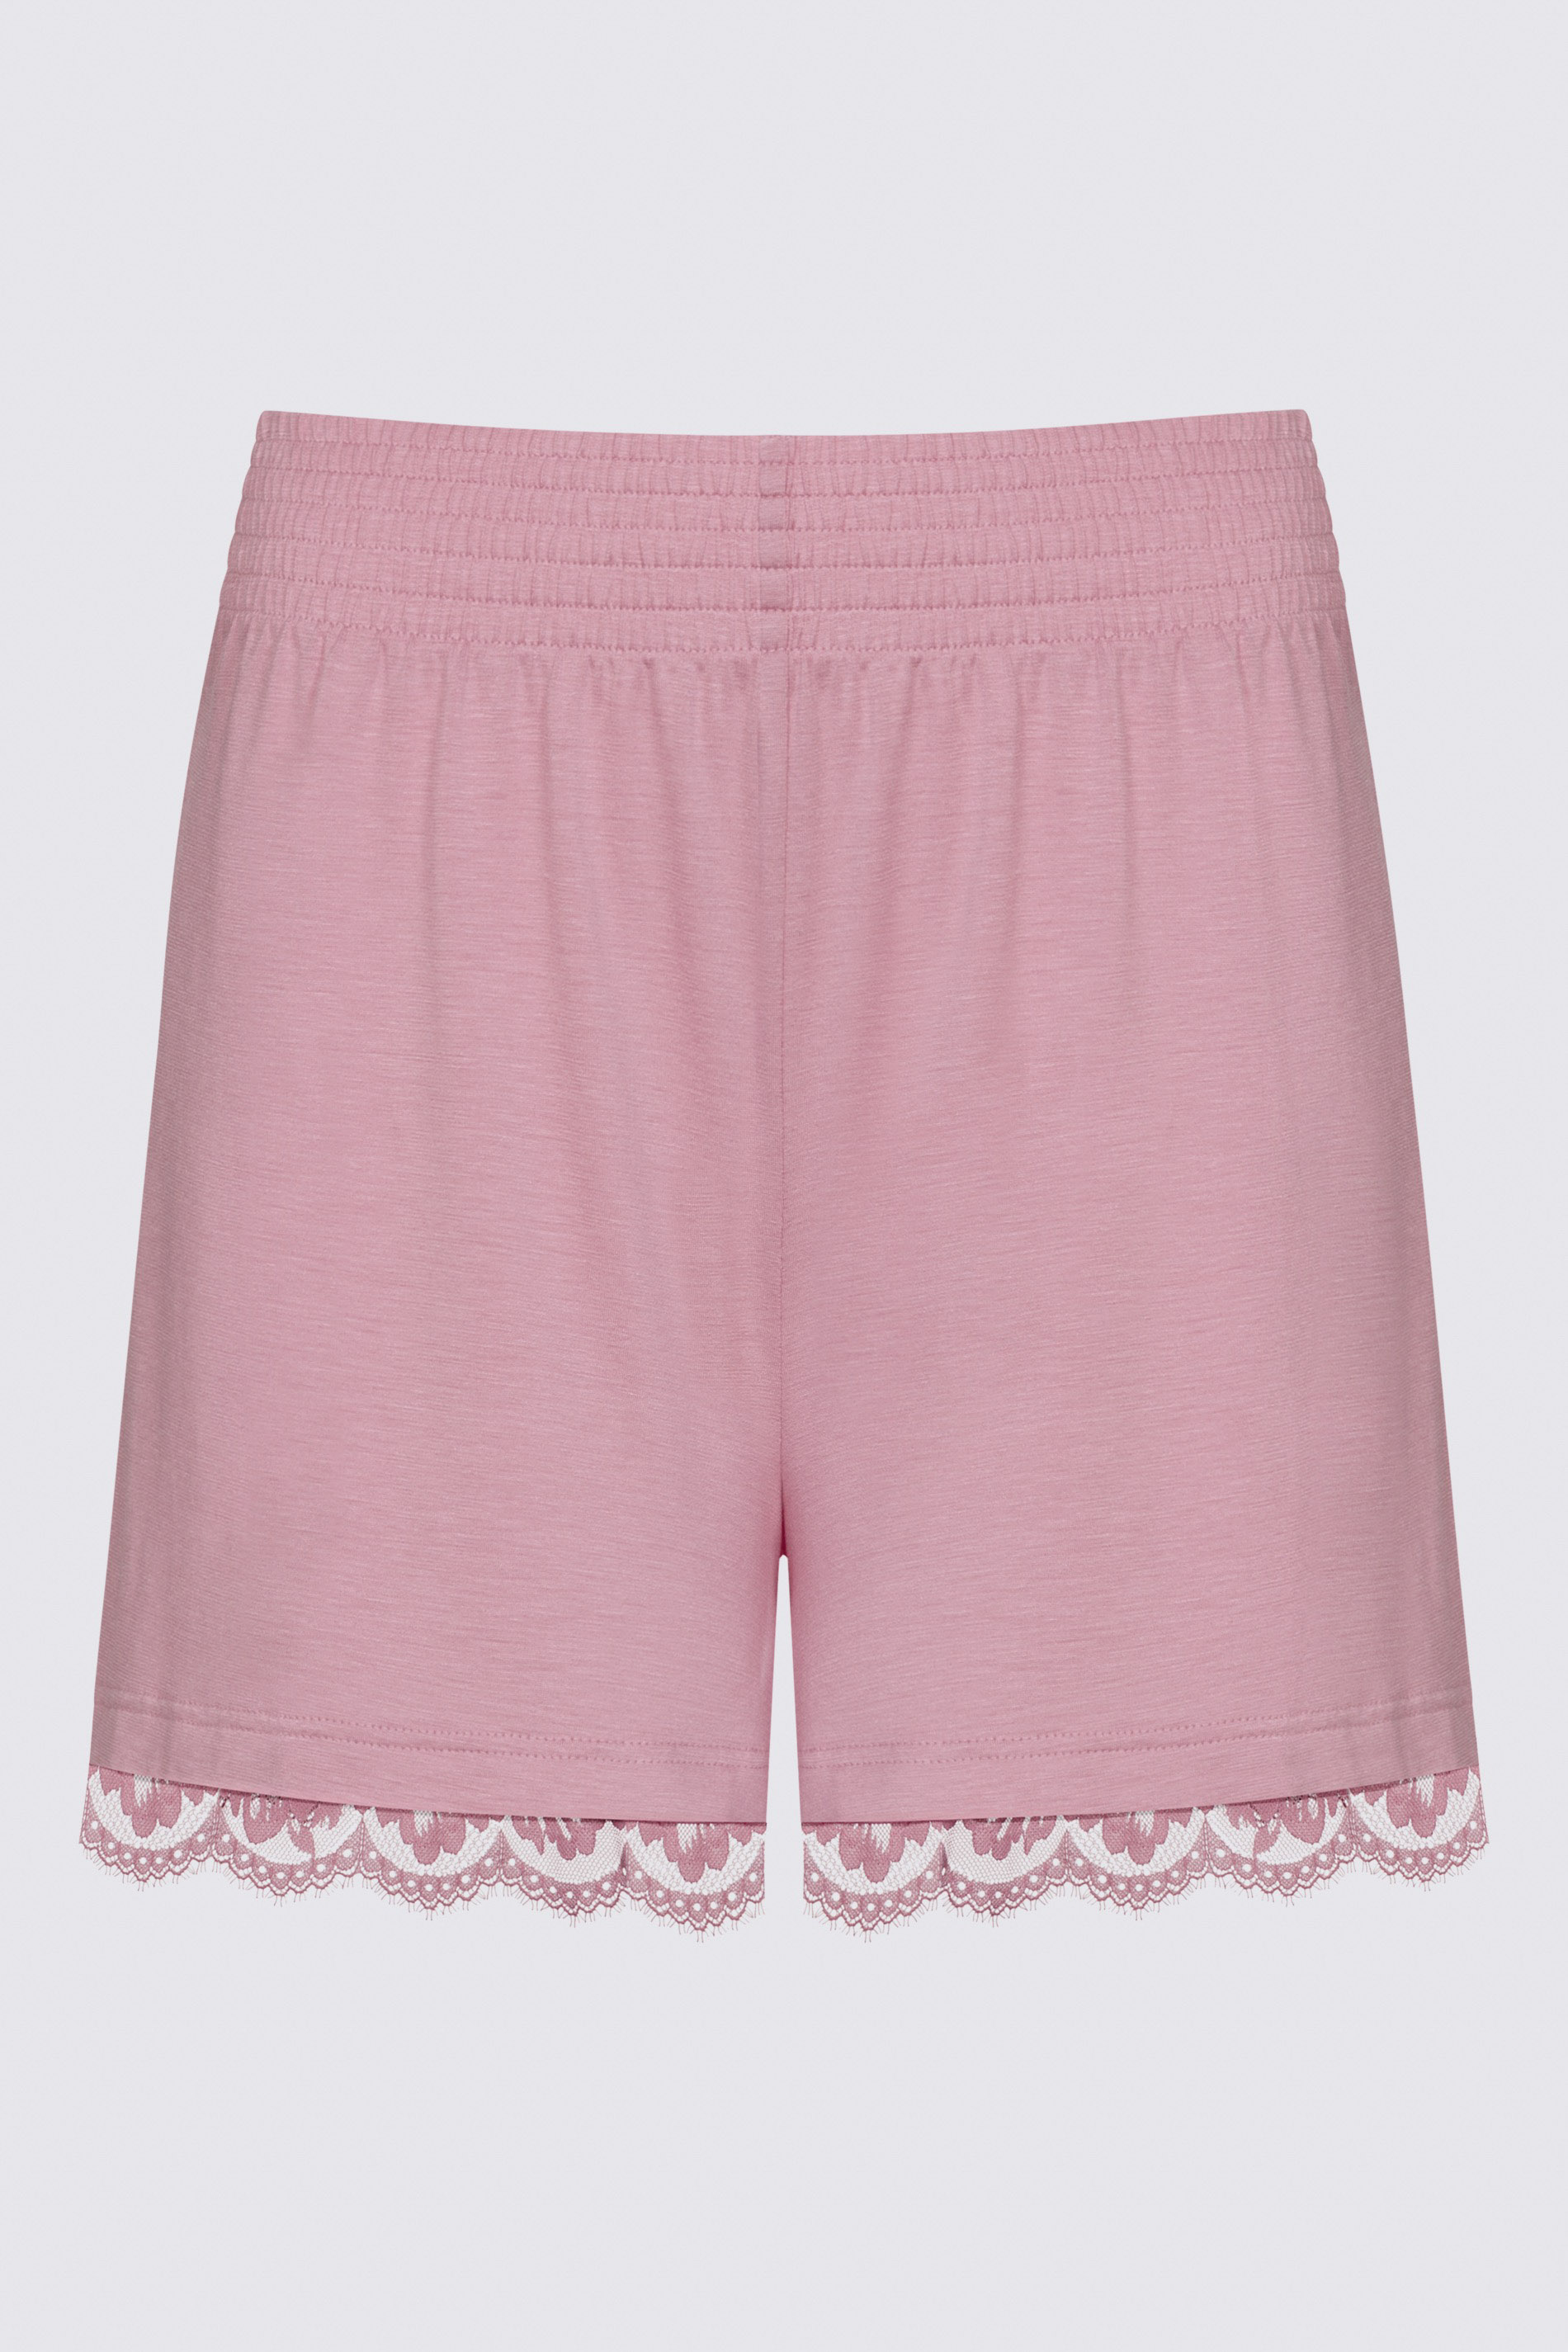 Shorts Serie Alena Uitknippen | mey®